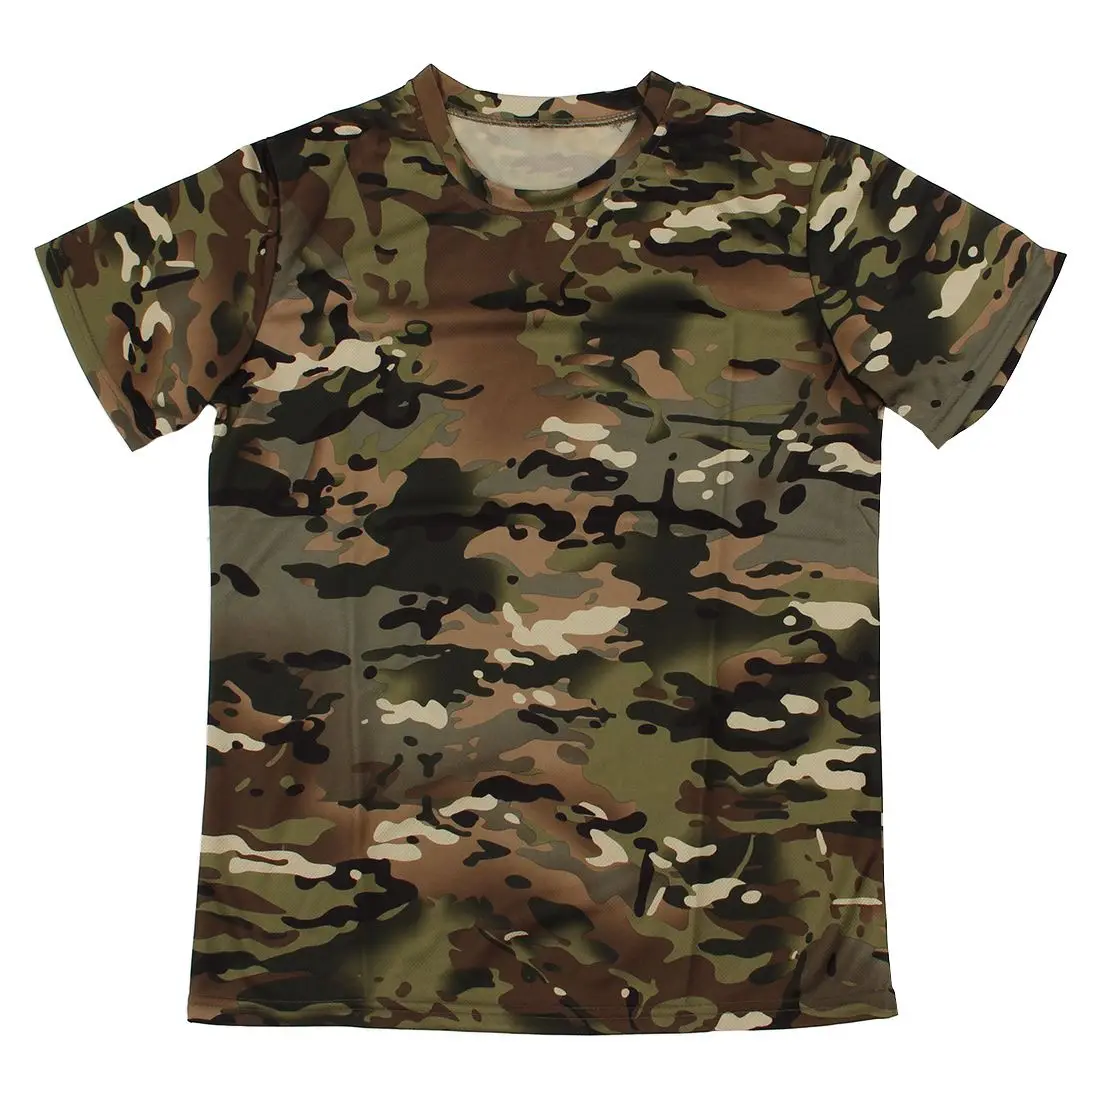 Mens Military Camouflage T Shirt Army Camo Combat Tee Summer Beach Top Jungle